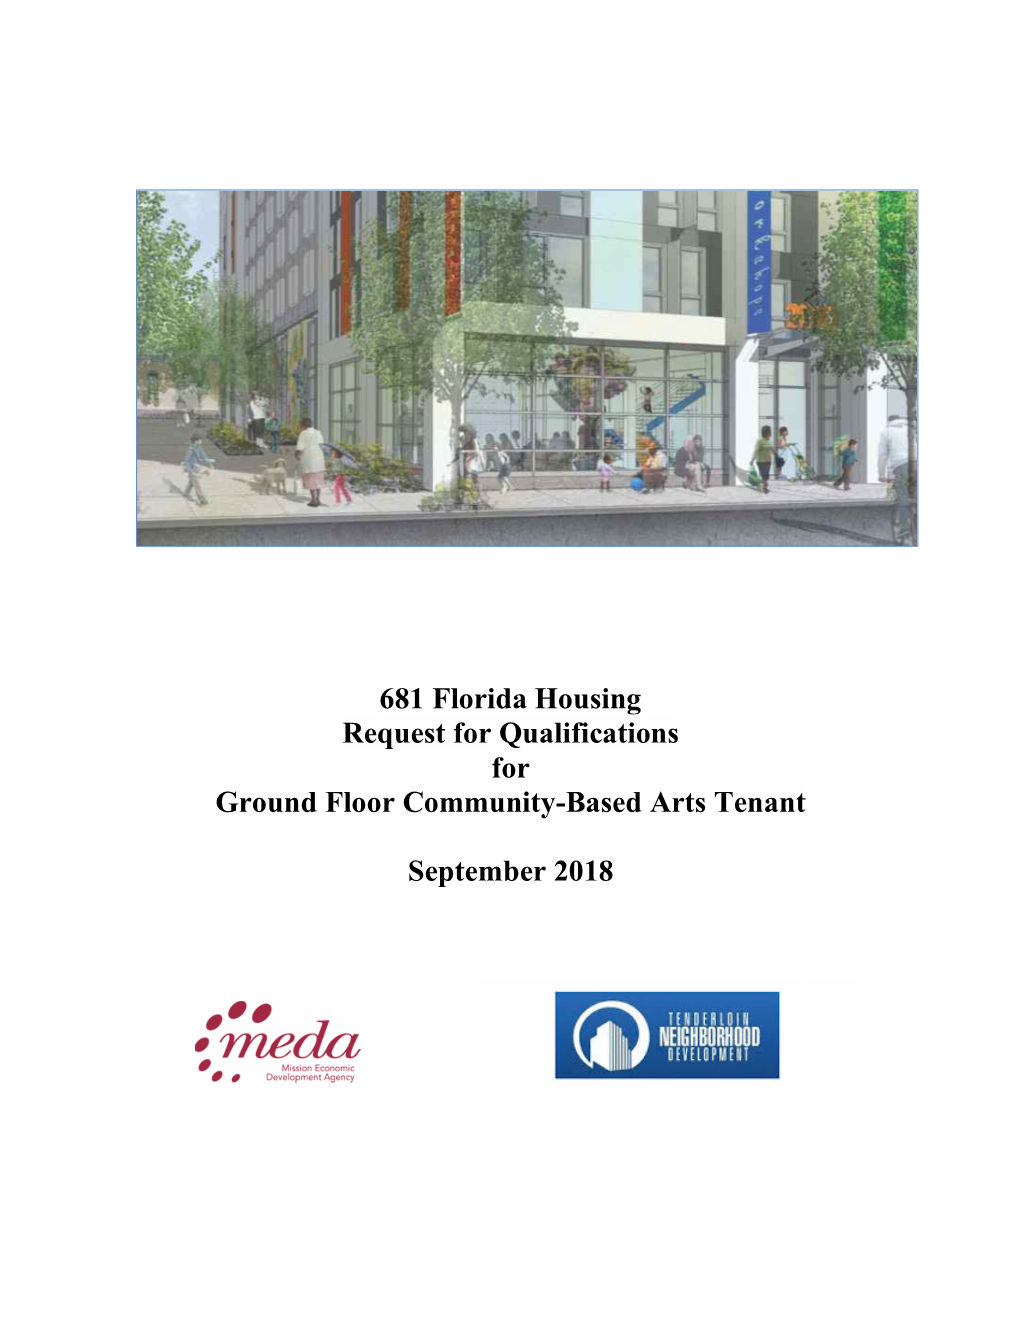 681 Florida Housing Request for Qualifications for Ground Floor Community-Based Arts Tenant